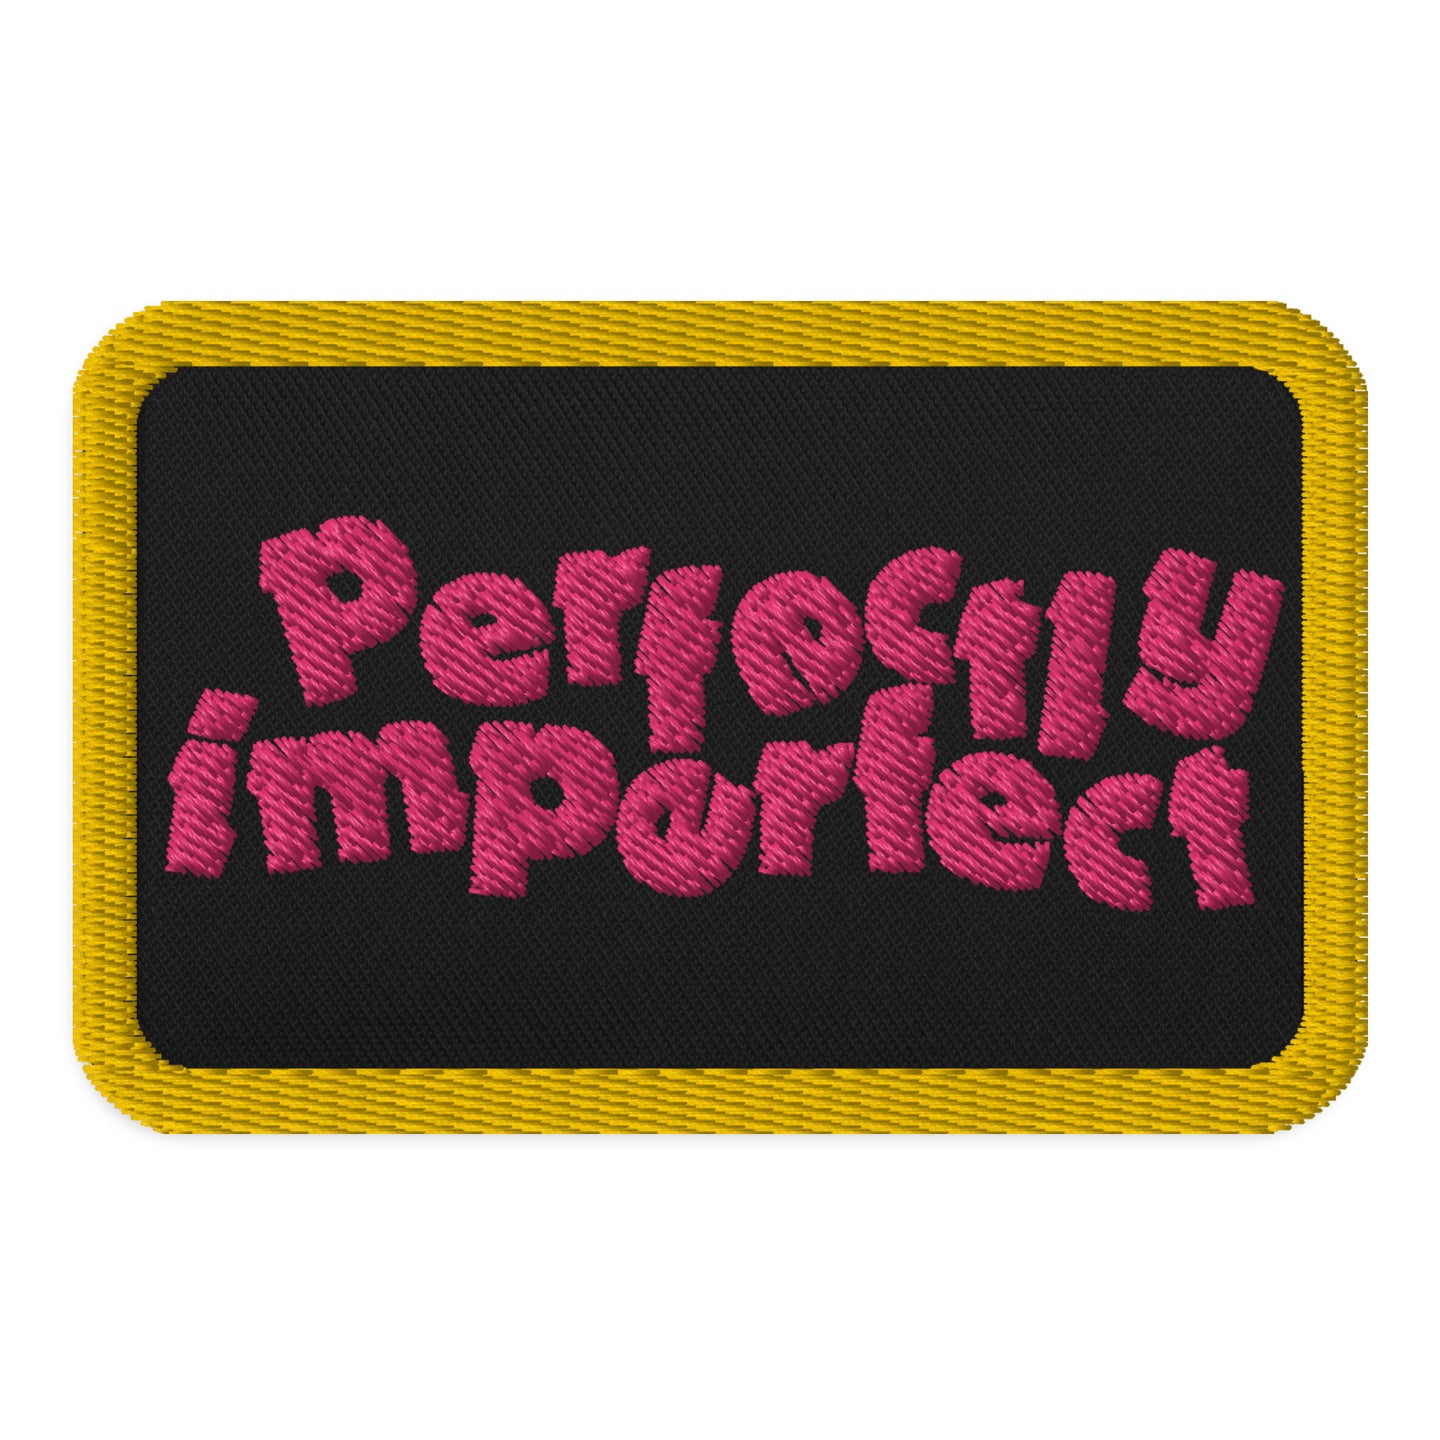 Perfectly Imperfect Embroidered patches